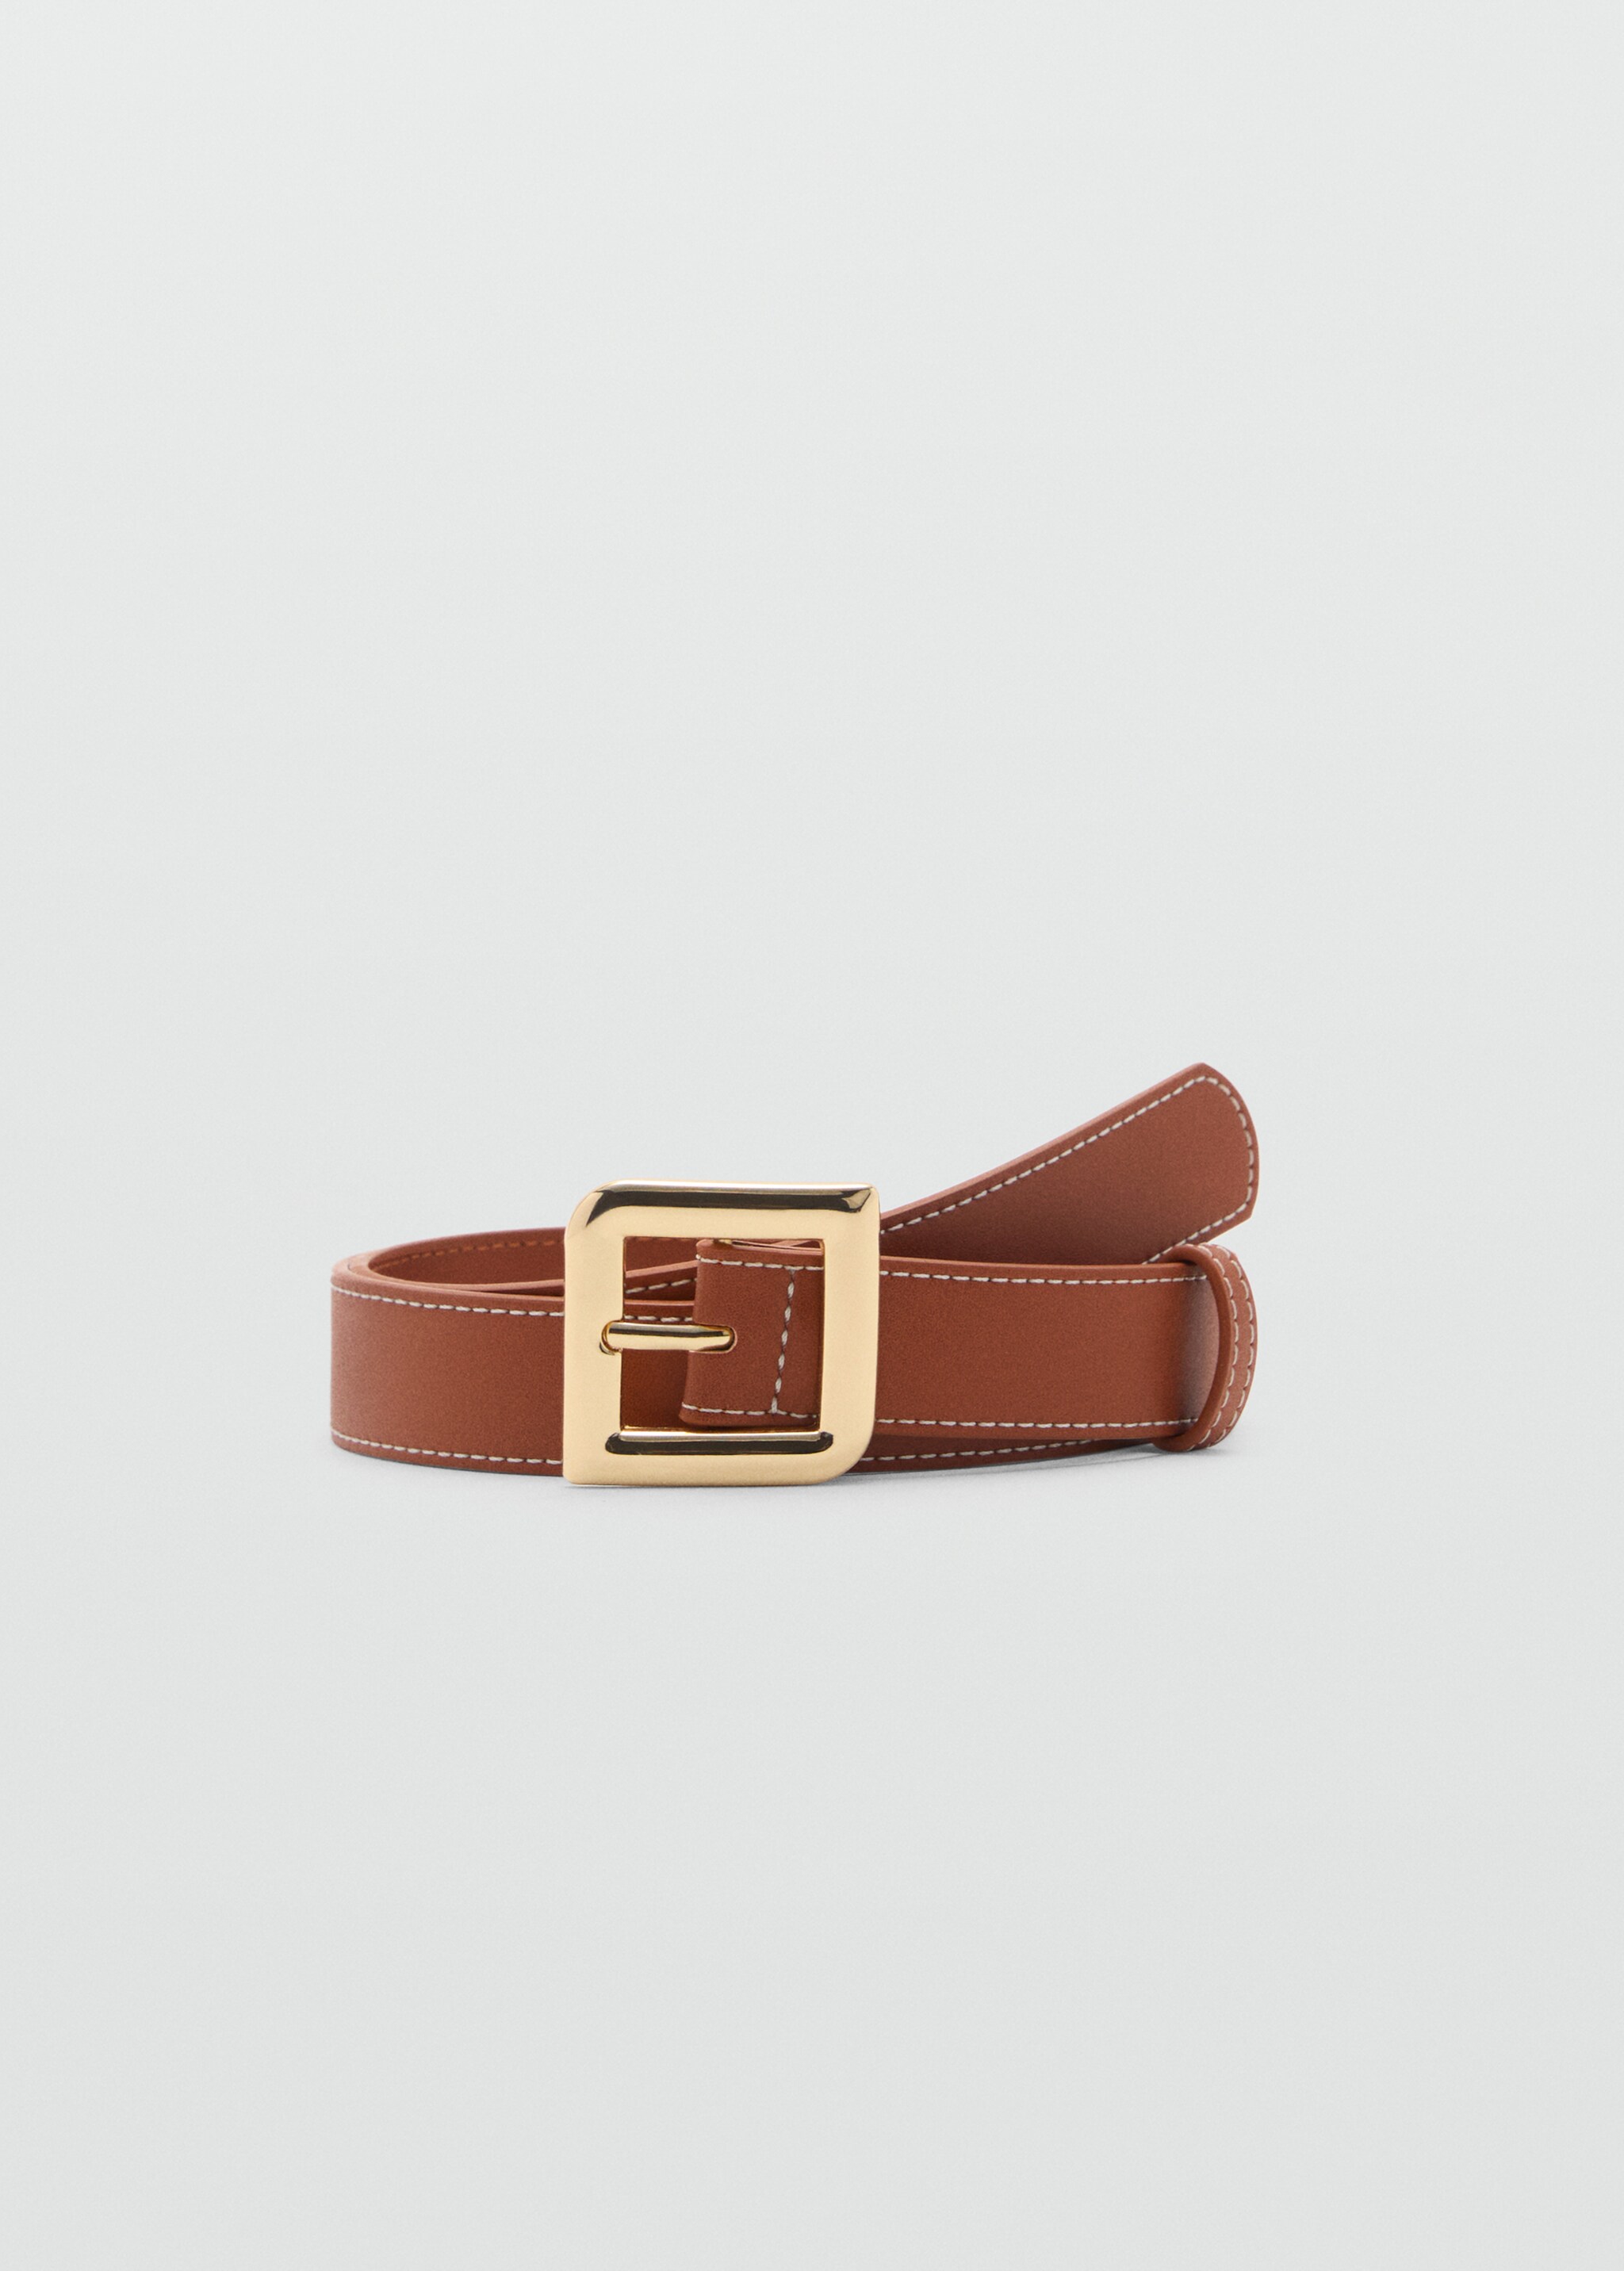 Square buckle belt - Article without model